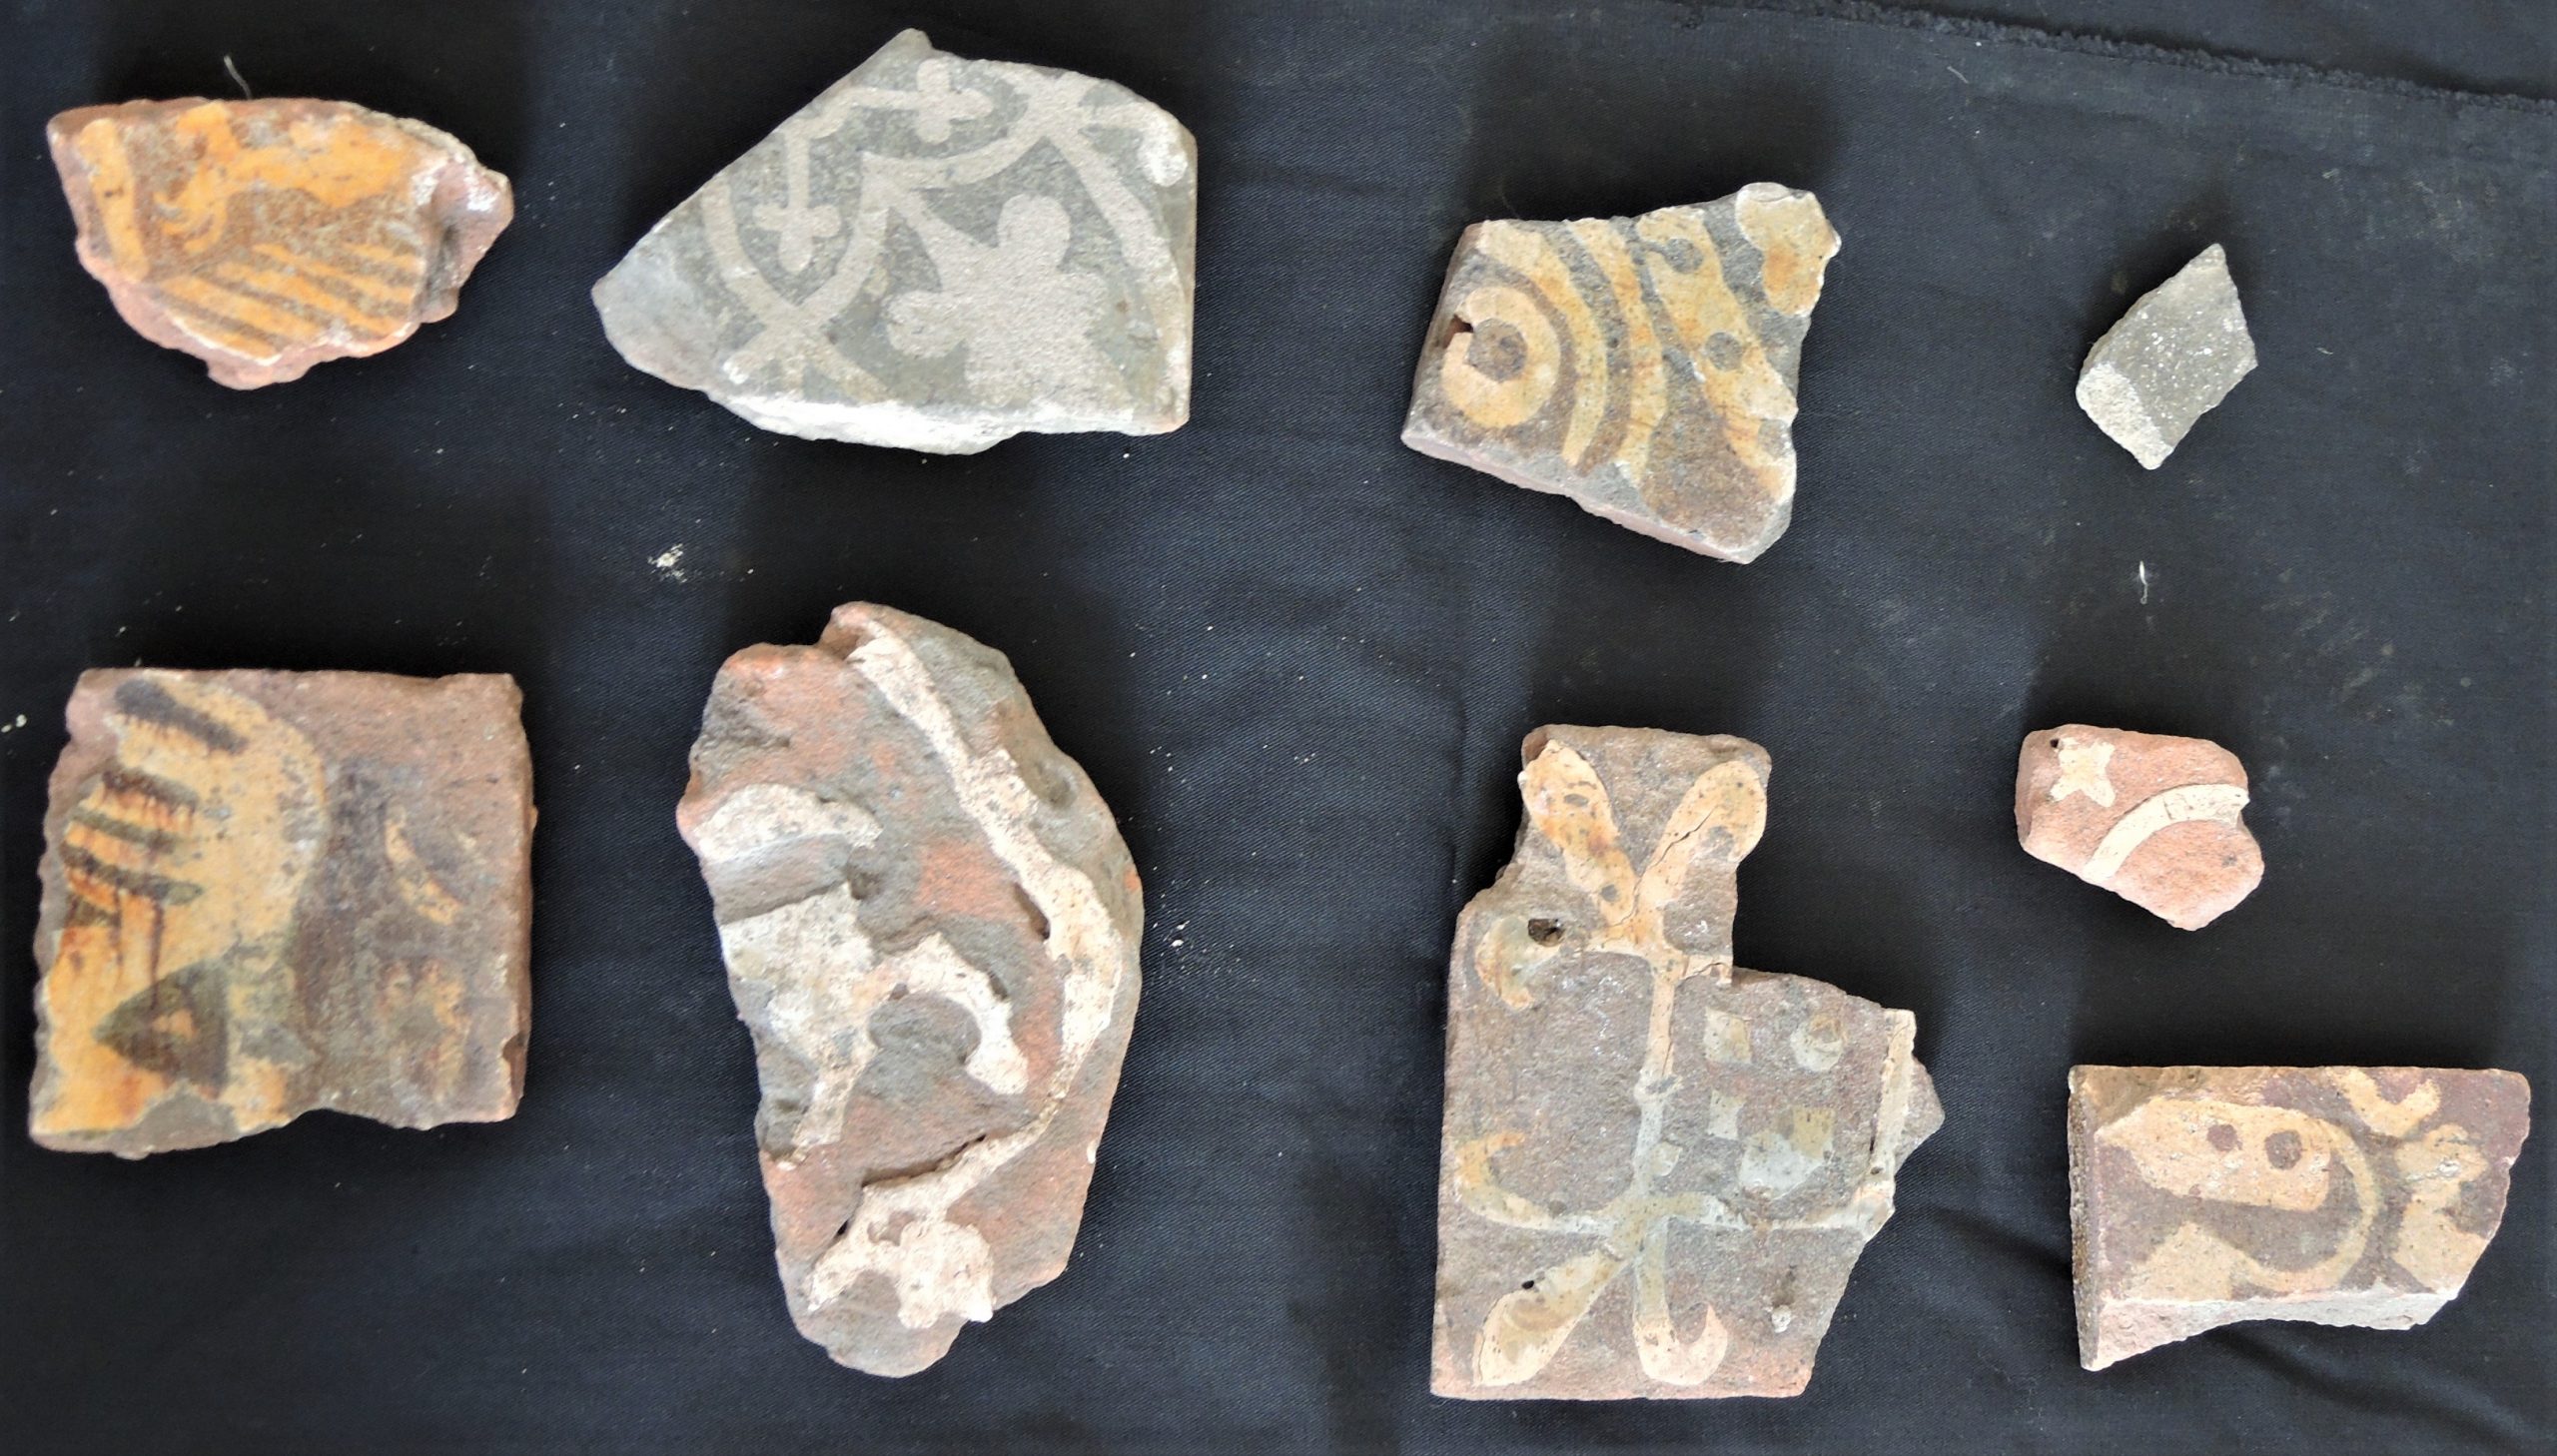 Nine small fragments of floor tiles from Eynsham Abbey, dating from the 13th to the 15th century CE.